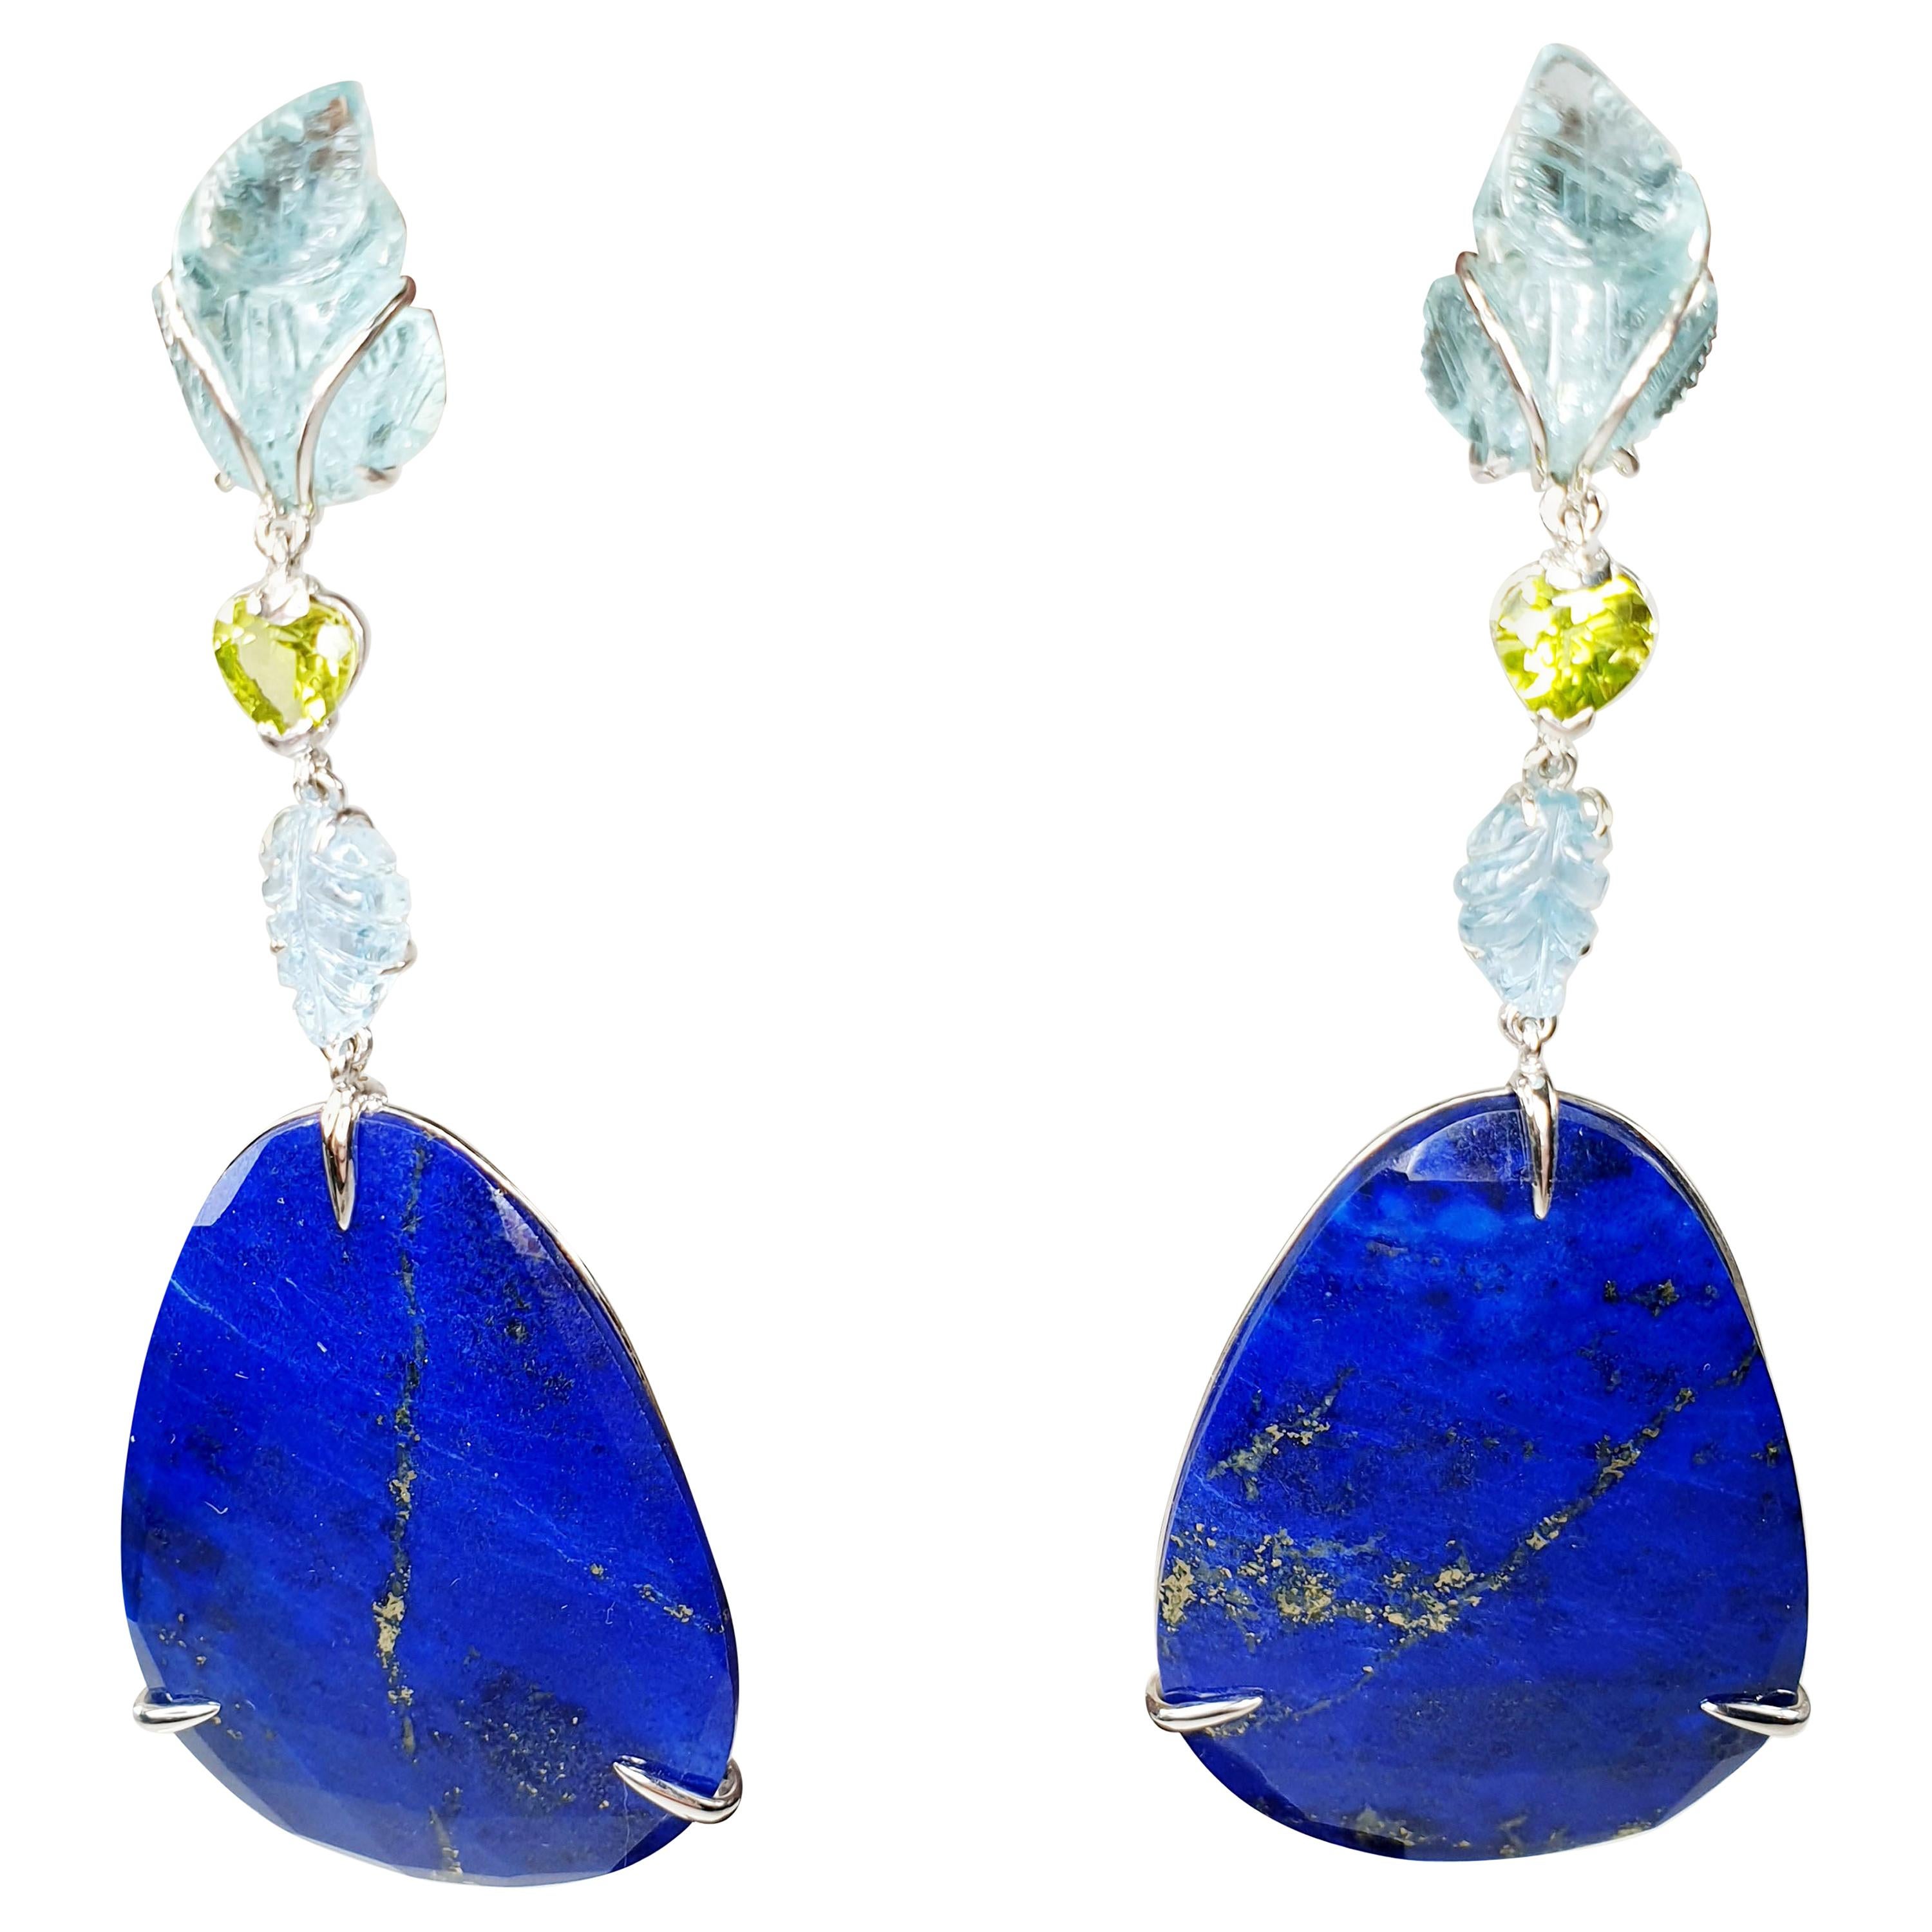 Carved Leafs Aquamarines Peridot in 18k Gold Earrings with Lapis Lazuli Drops